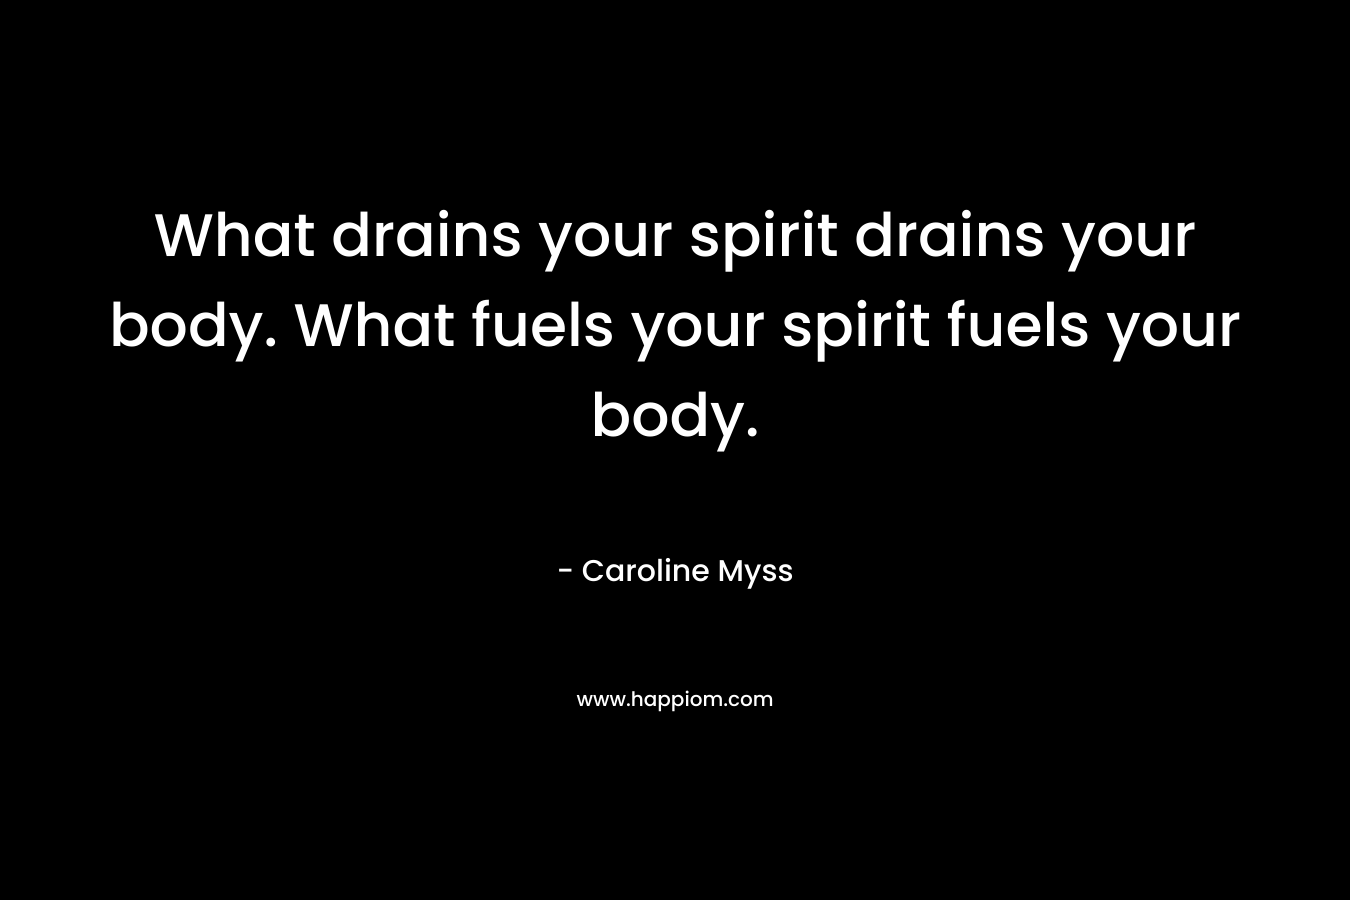 What drains your spirit drains your body. What fuels your spirit fuels your body. – Caroline Myss